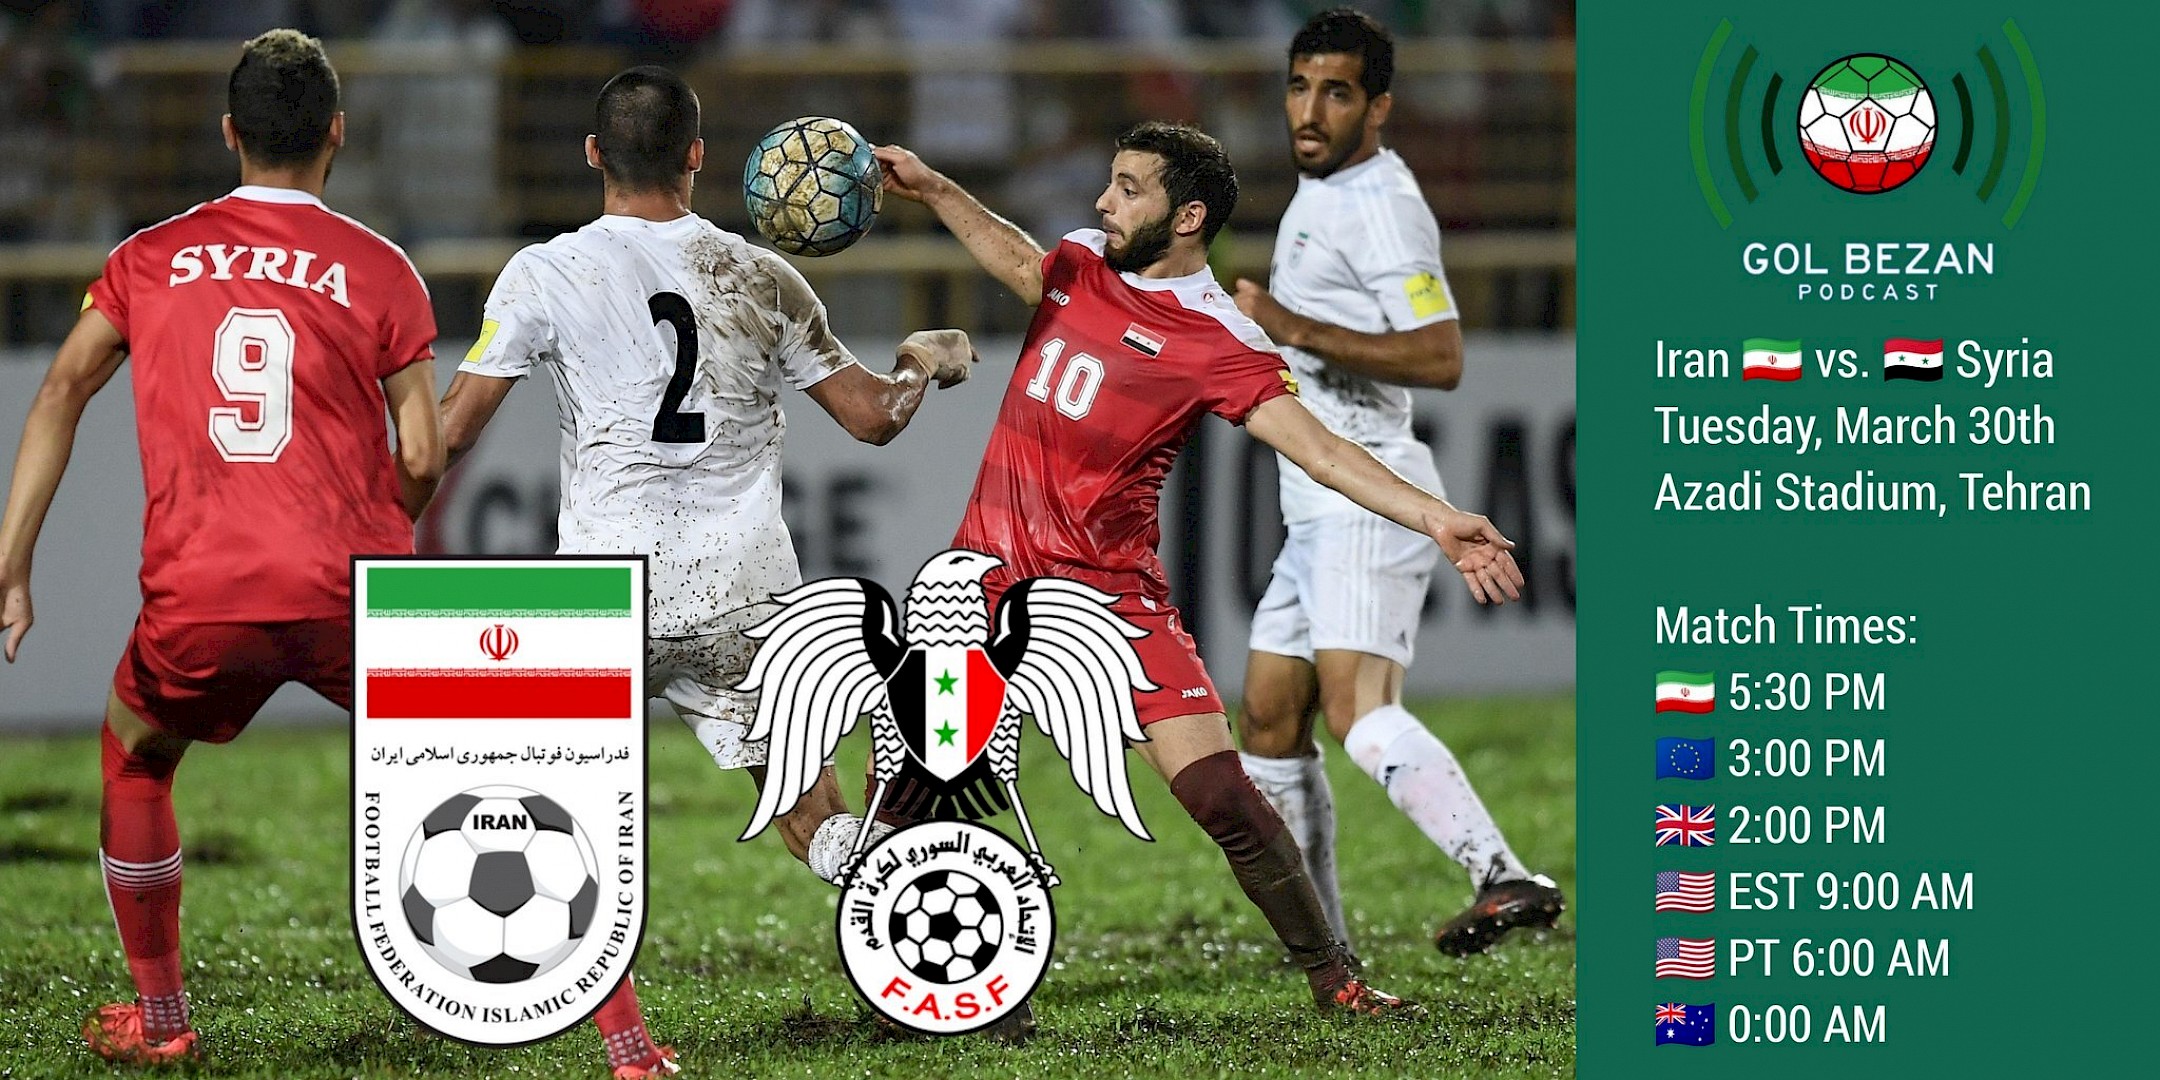 PREVIEW: Iran vs. Syria - Team news, opposition insight, predictions and more